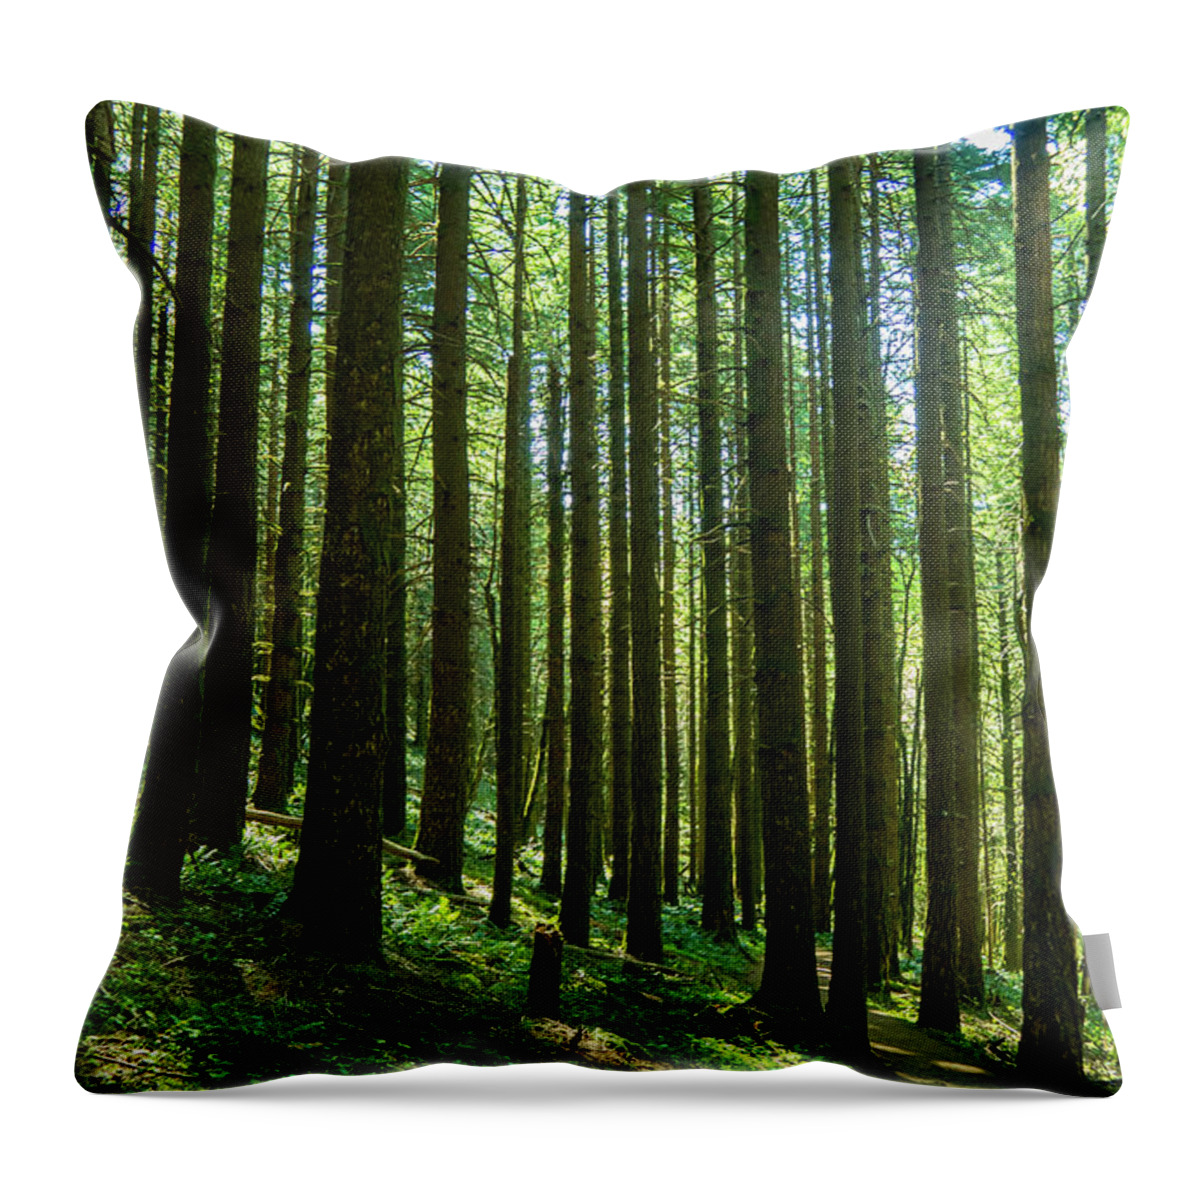 Columbia River Gorge Throw Pillow featuring the photograph Go Take A Hike by Leslie Struxness